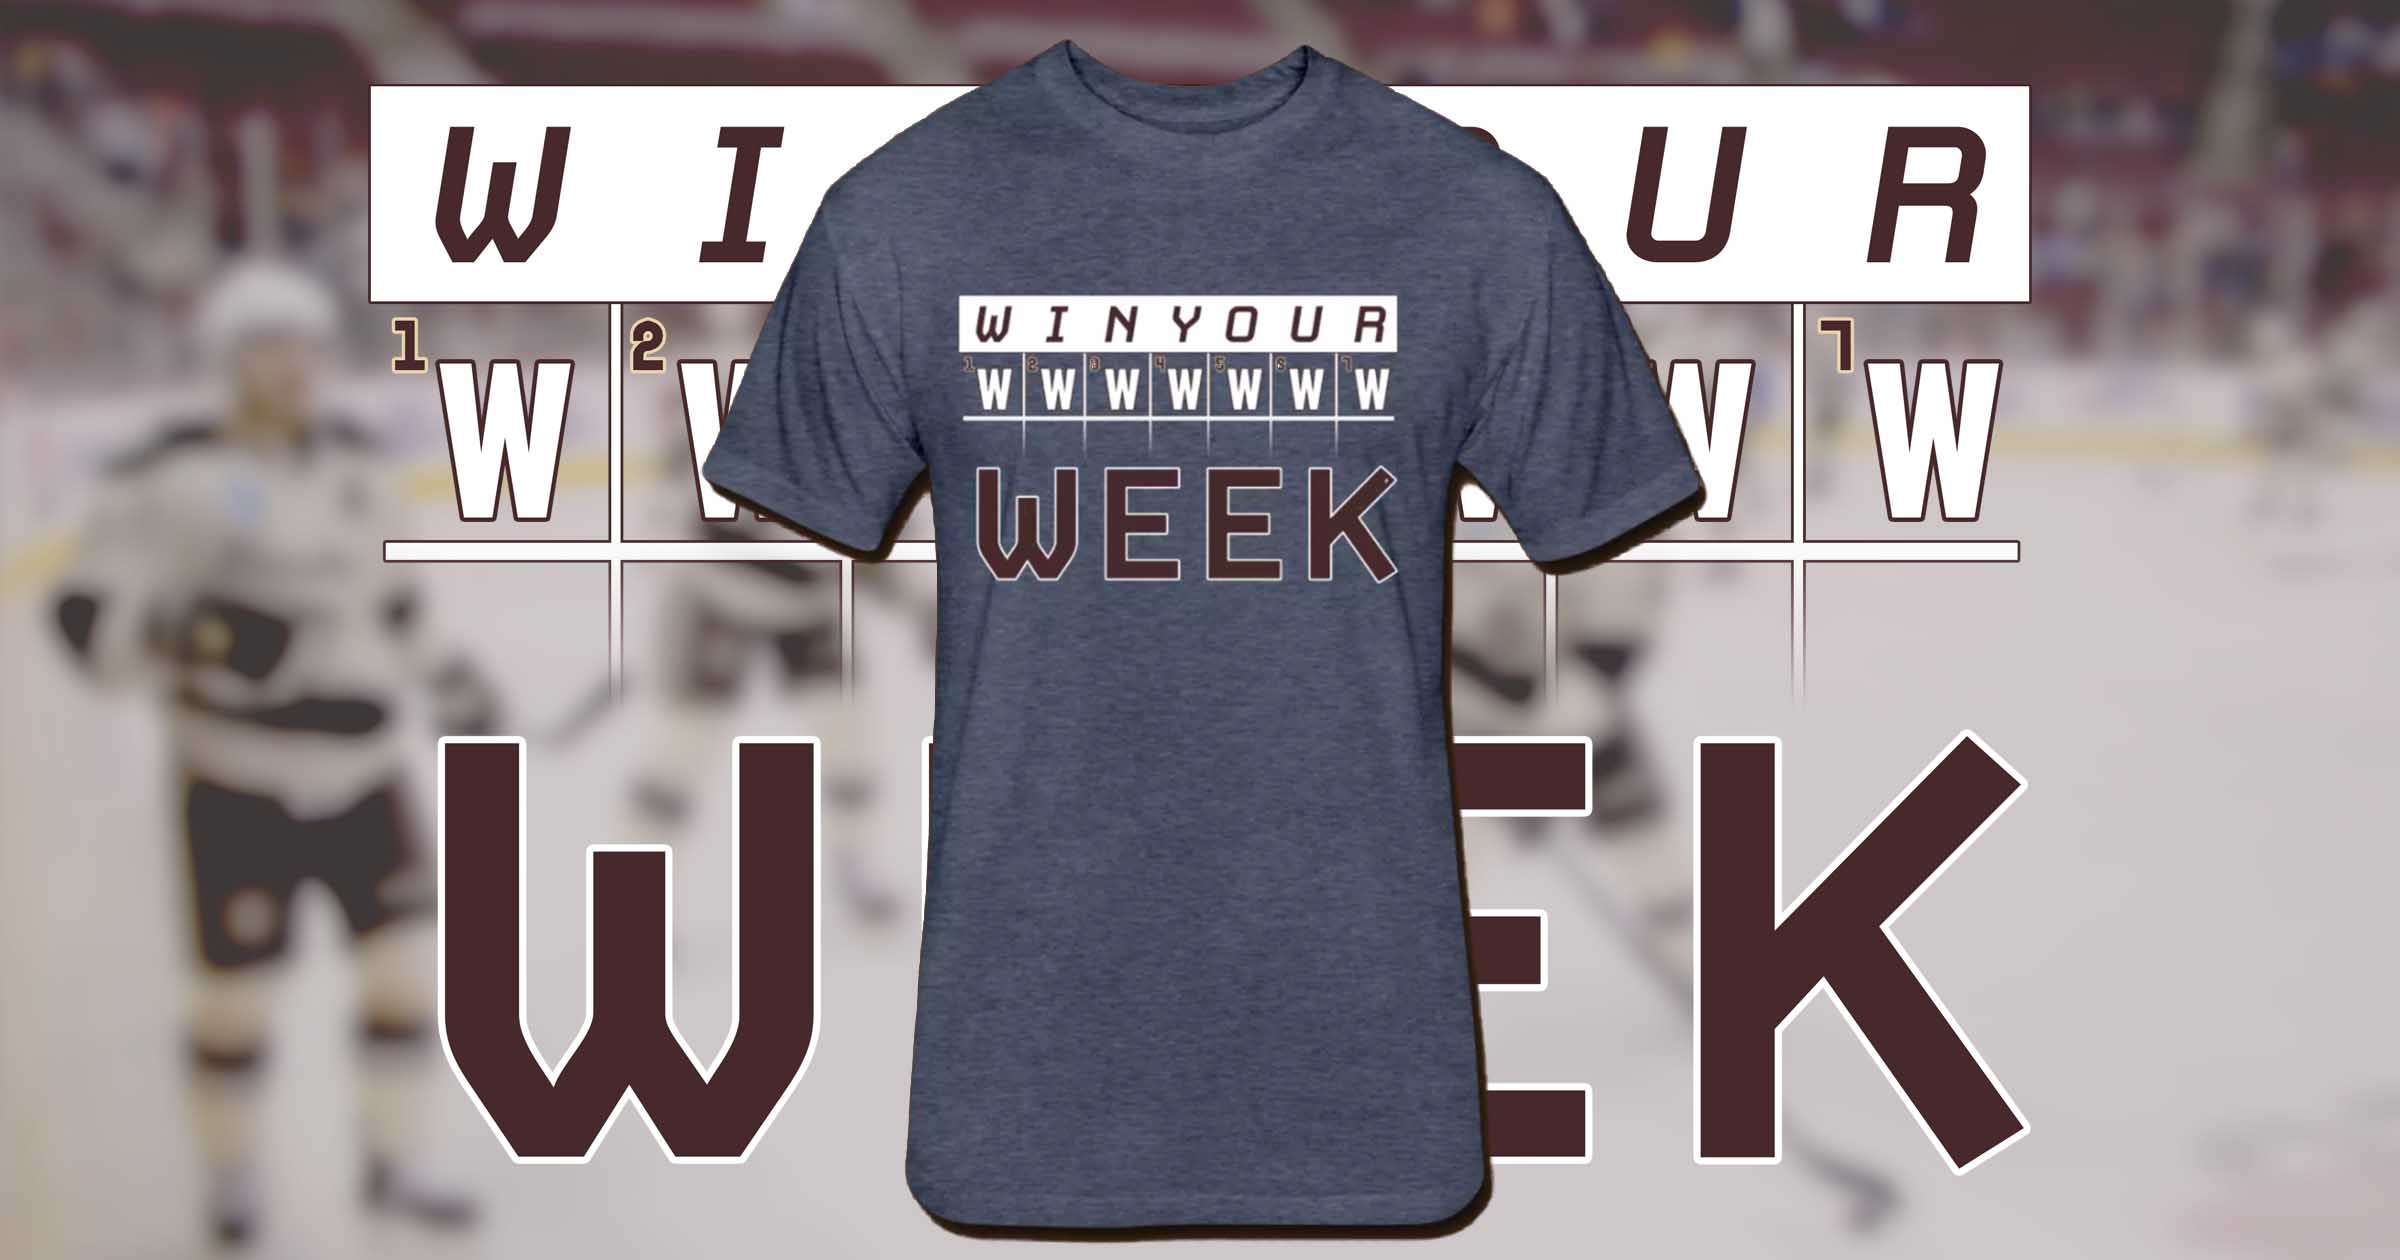 Win Your Week Shirts Now On Sale